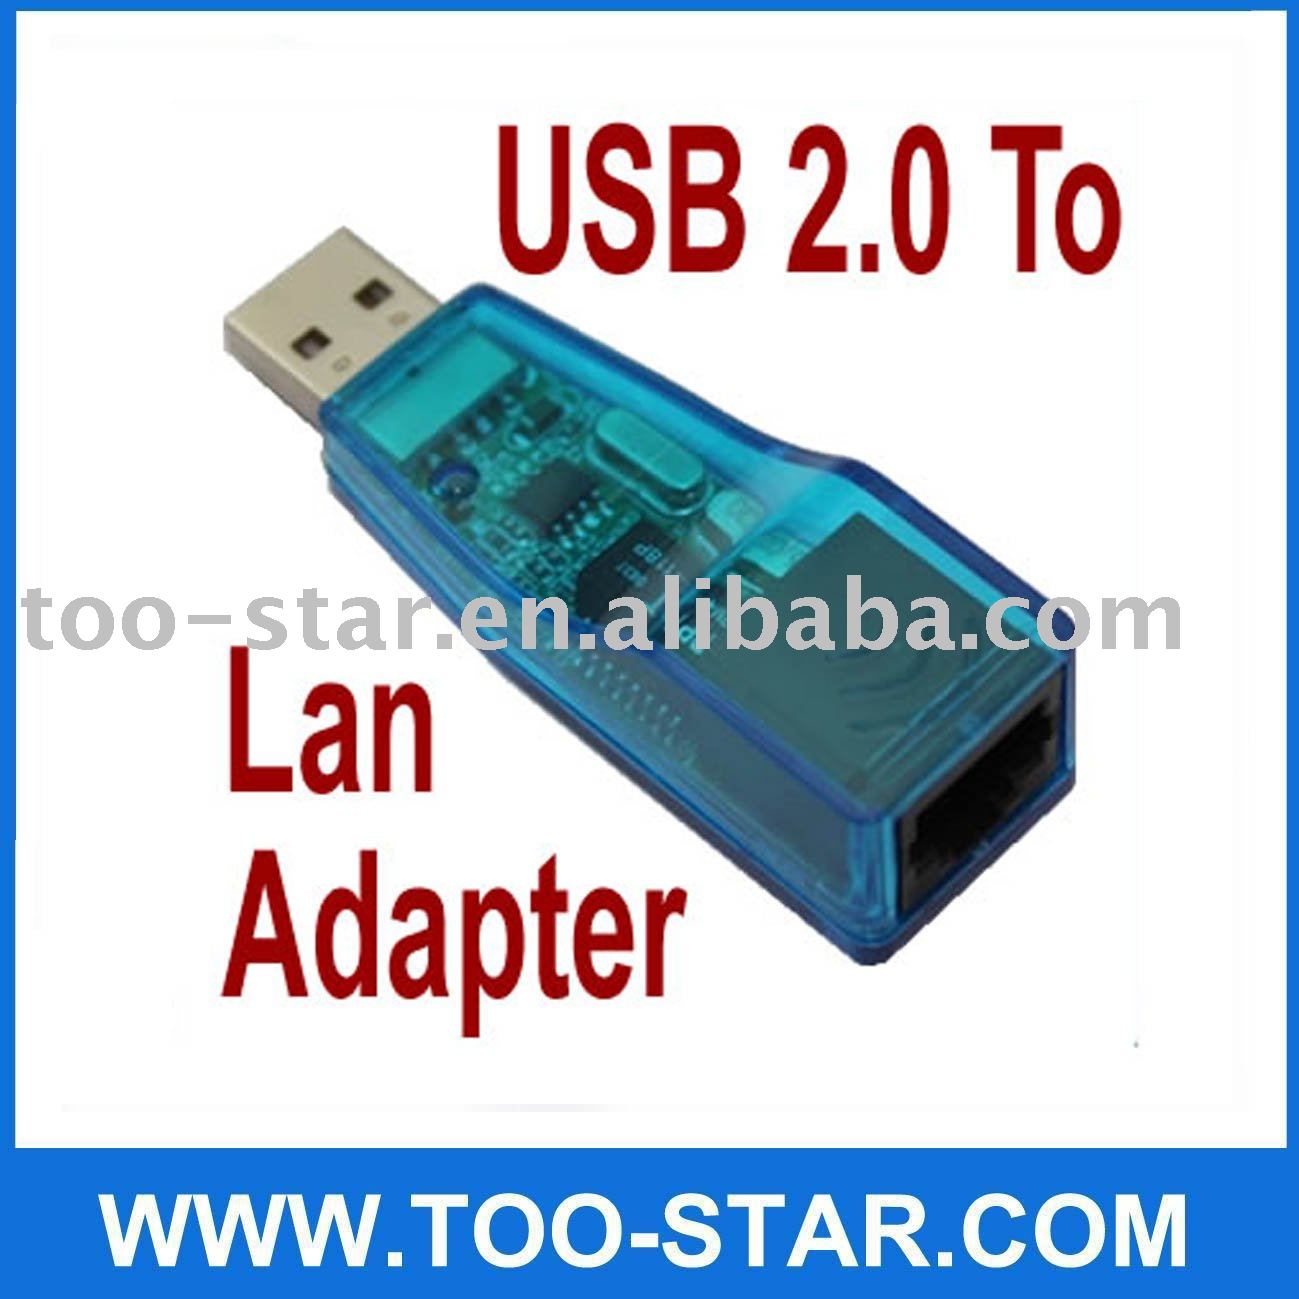 Intel Ethernet Adapter Complete Driver Pack 28.1.1 instal the new version for windows